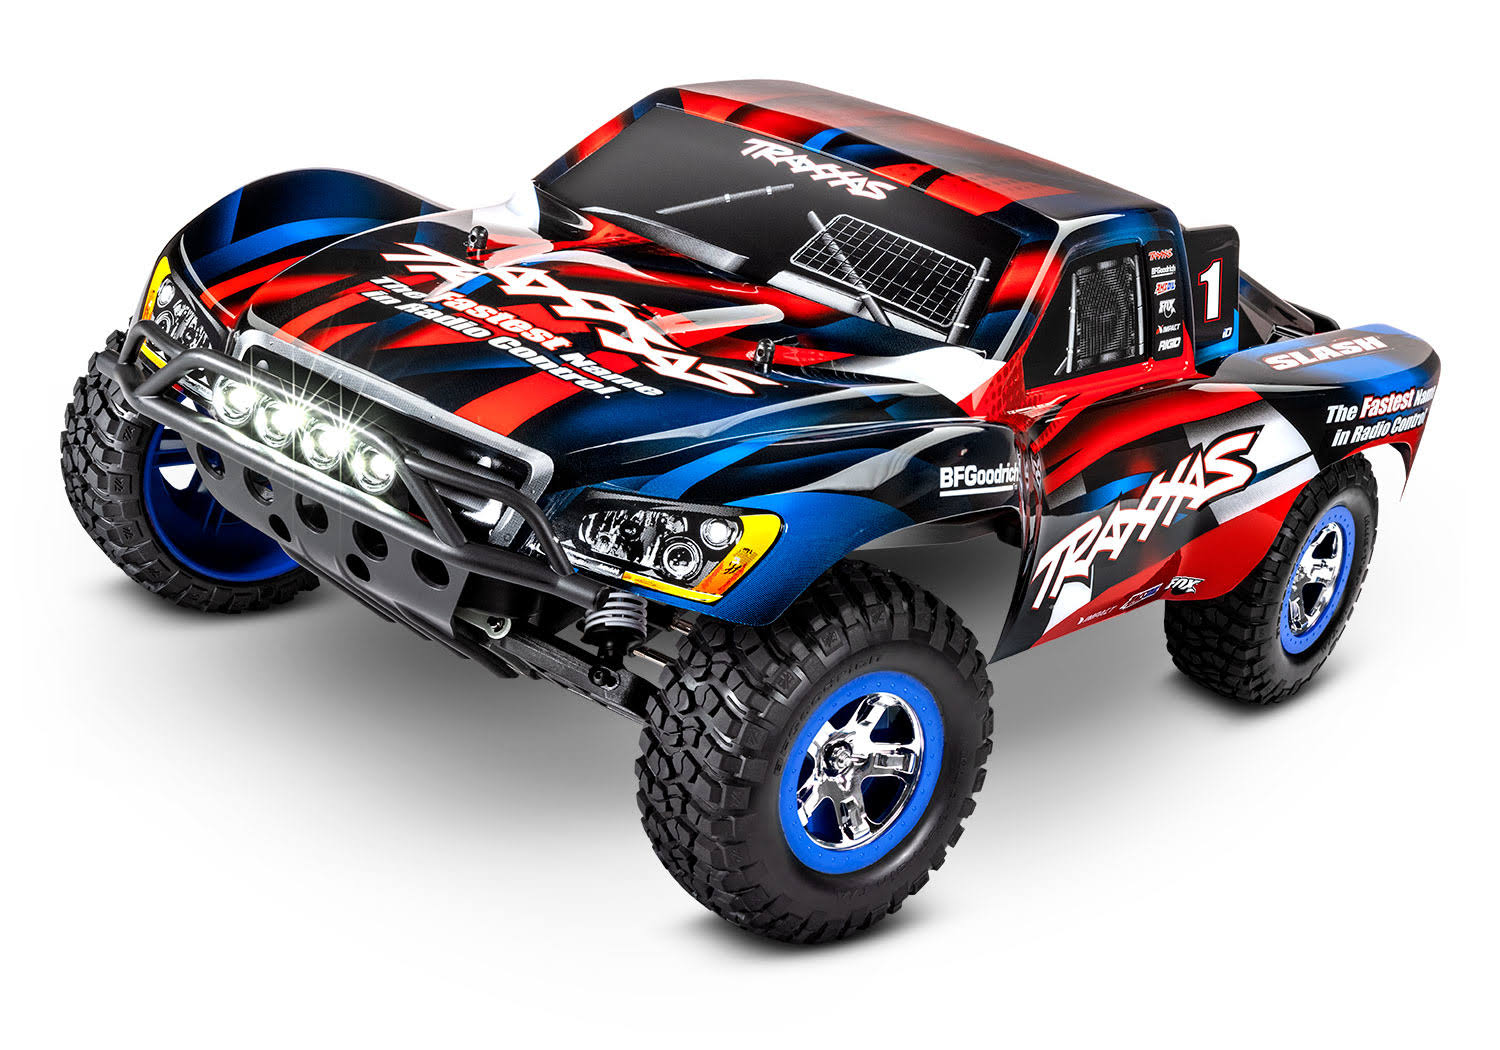 TRAXXAS TRA 58034-61-RBLU Slash: 1/10-Scale 2WD Short Course Racing Truck. Ready-To-Race with TQ 2.4GHz radio system, XL-5 ESC (fwd/rev), and LED